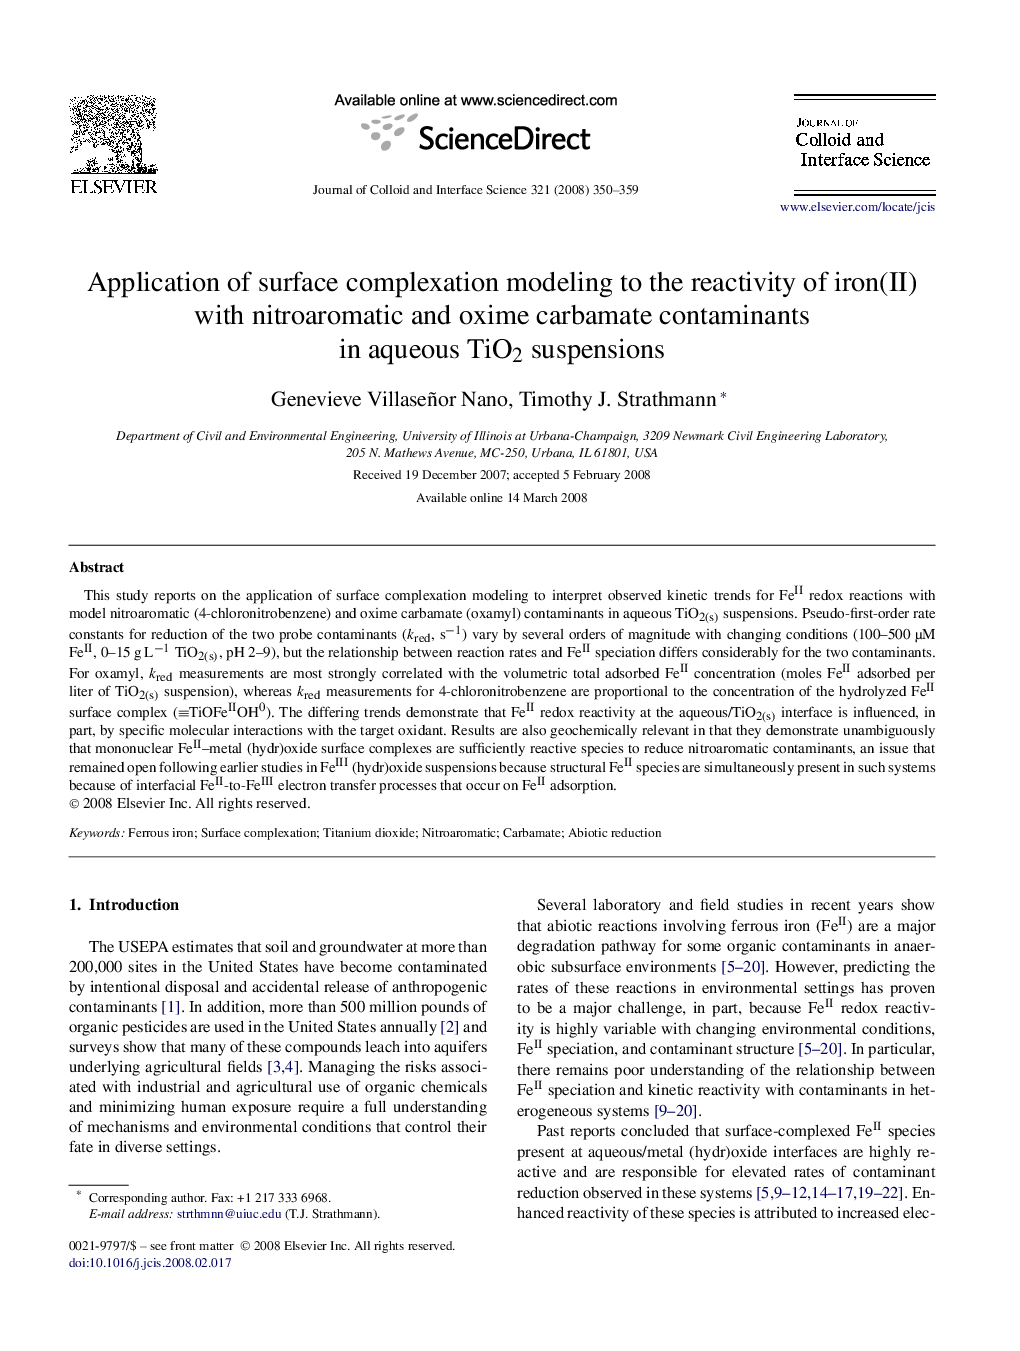 Application of surface complexation modeling to the reactivity of iron(II) with nitroaromatic and oxime carbamate contaminants in aqueous TiO2 suspensions